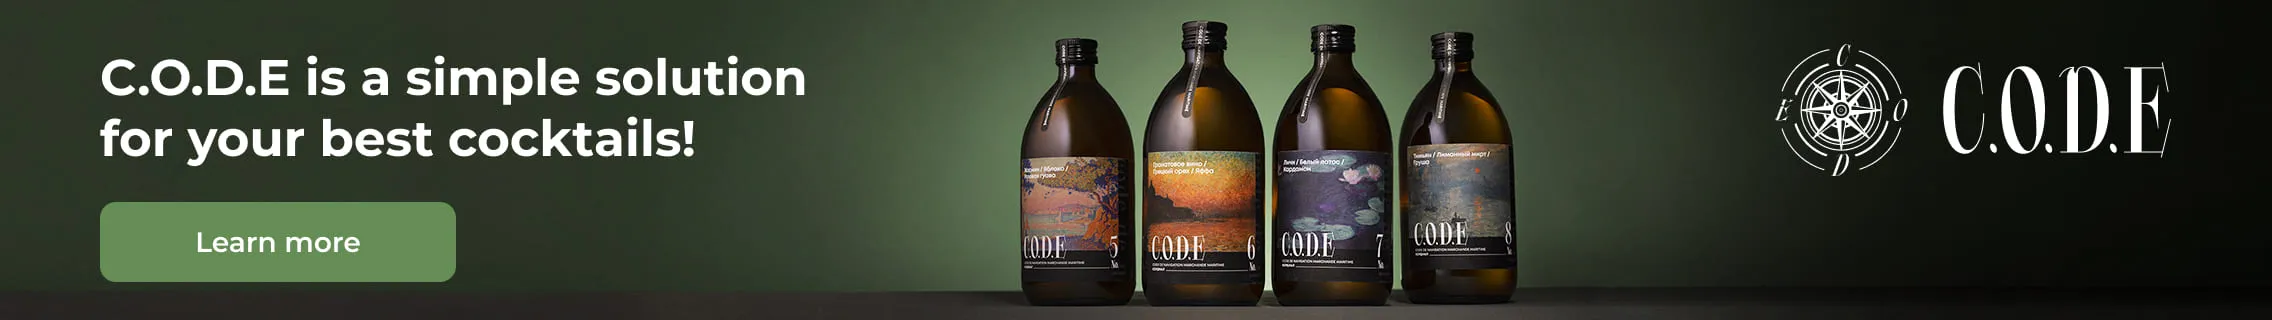 C.O.D.E is a simple solution for your best cocktails!